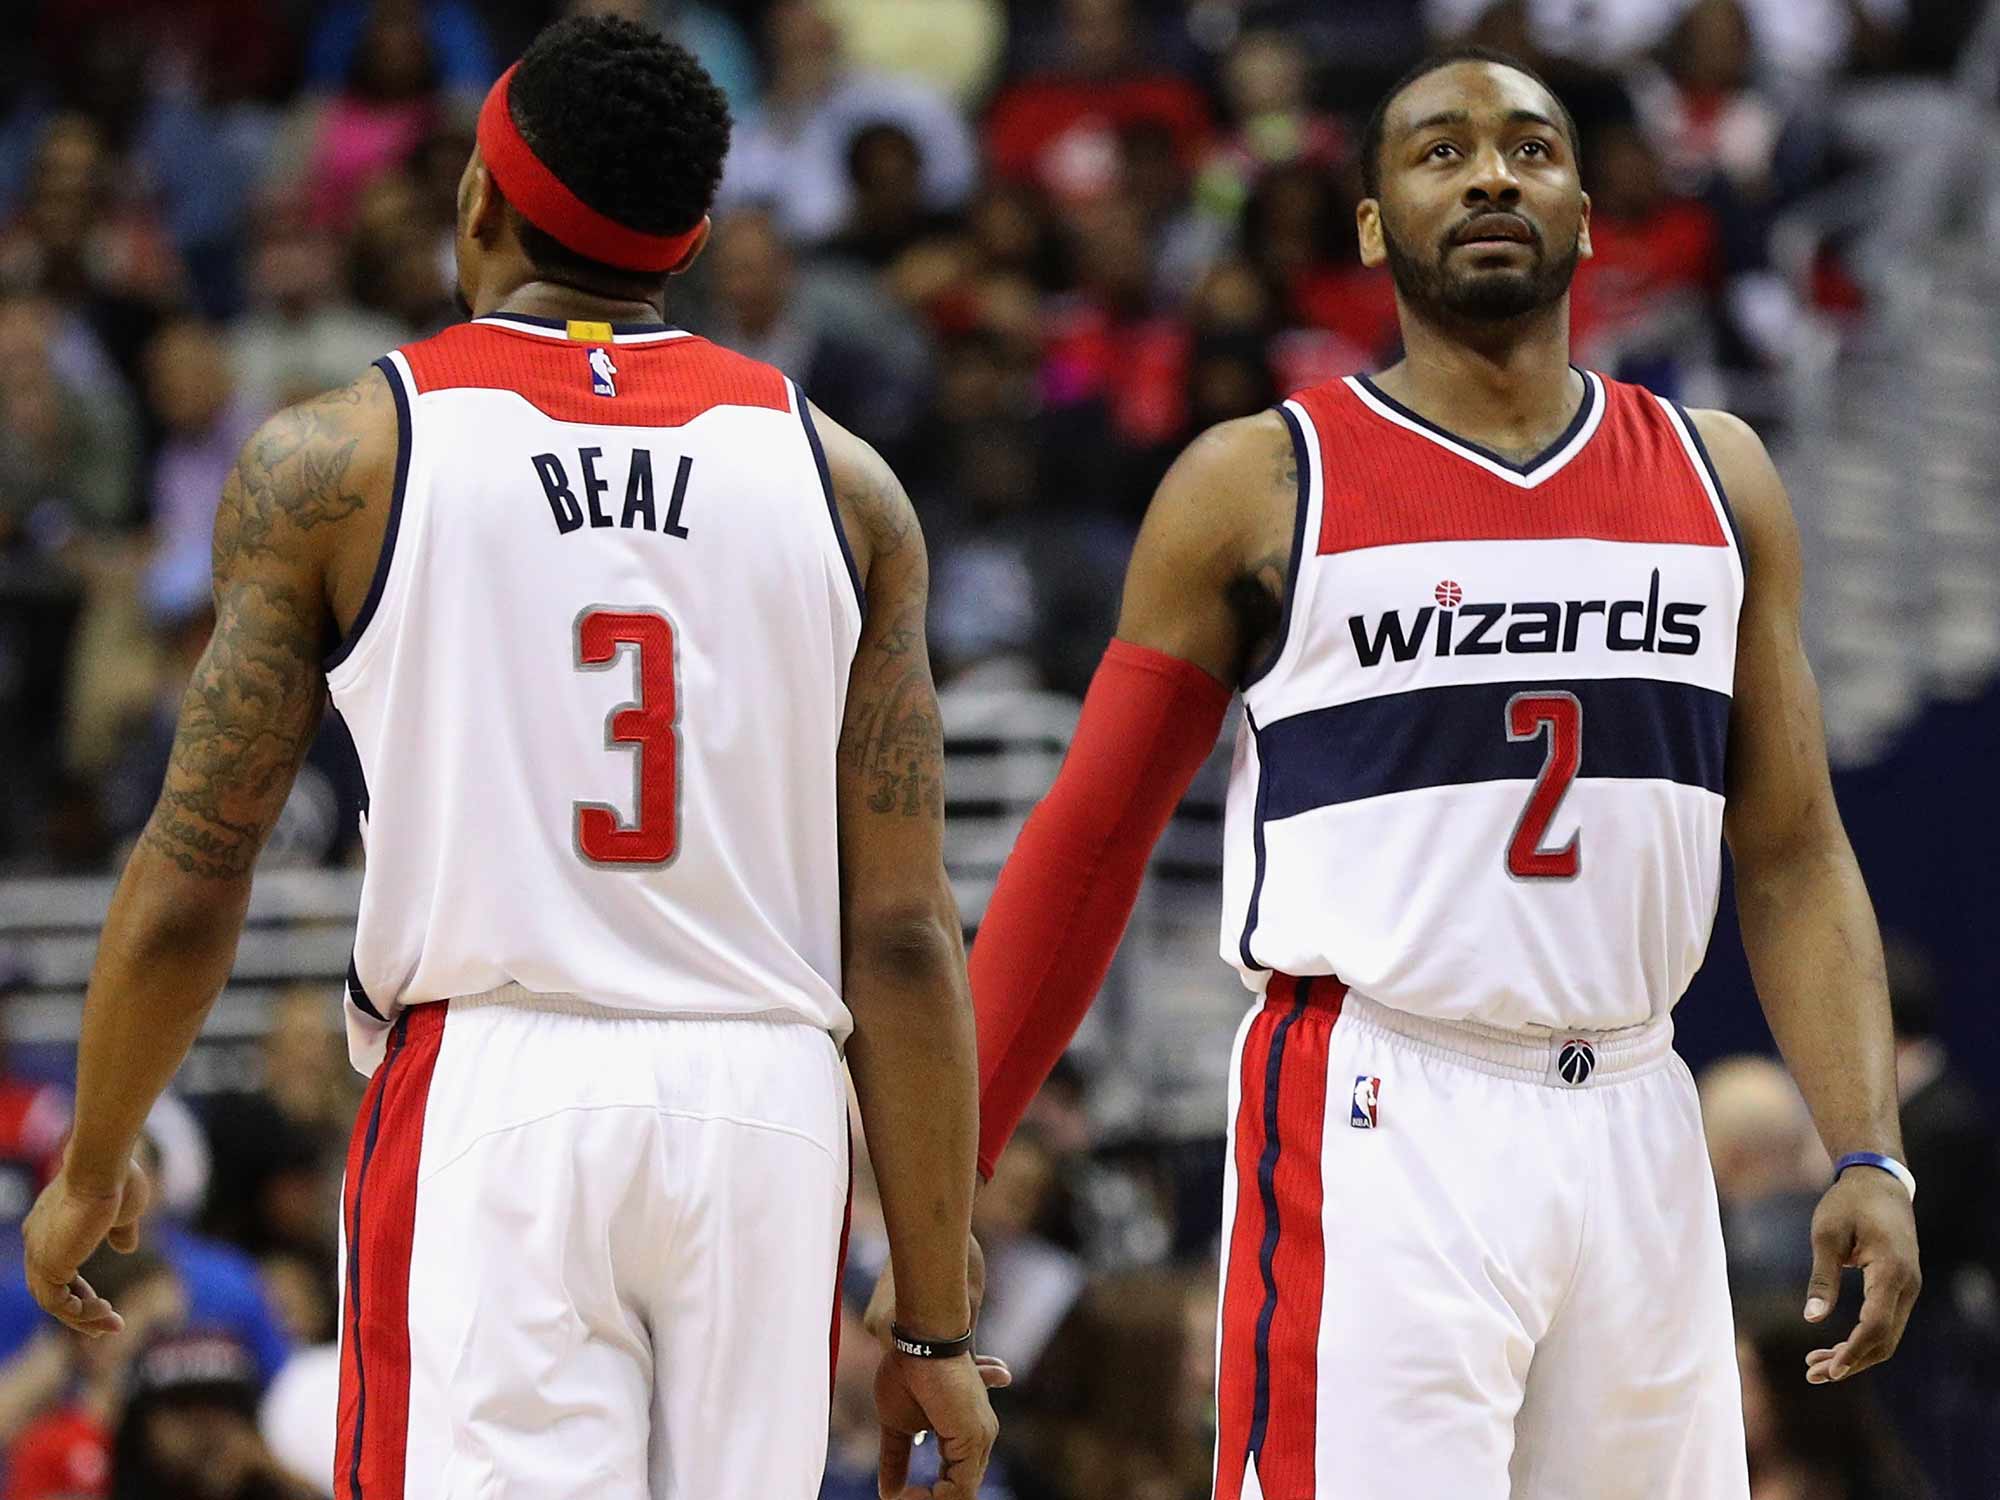 Wizards' John Wall: 'They Still Don't Respect Me'